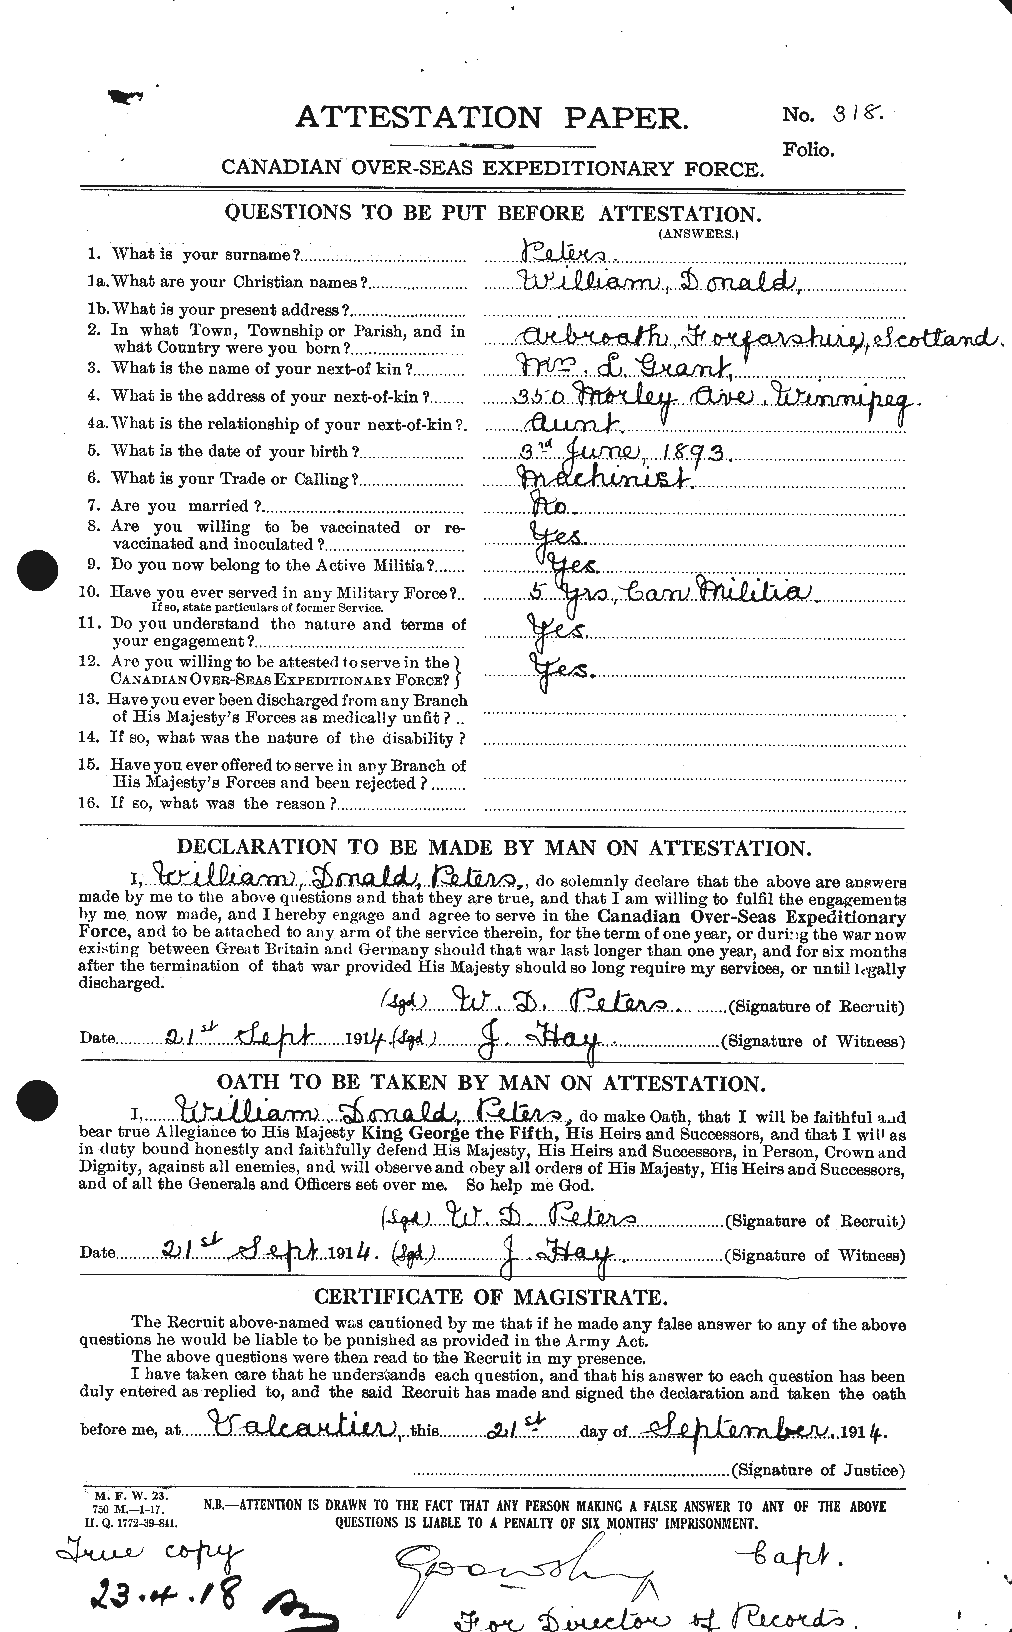 Personnel Records of the First World War - CEF 575653a